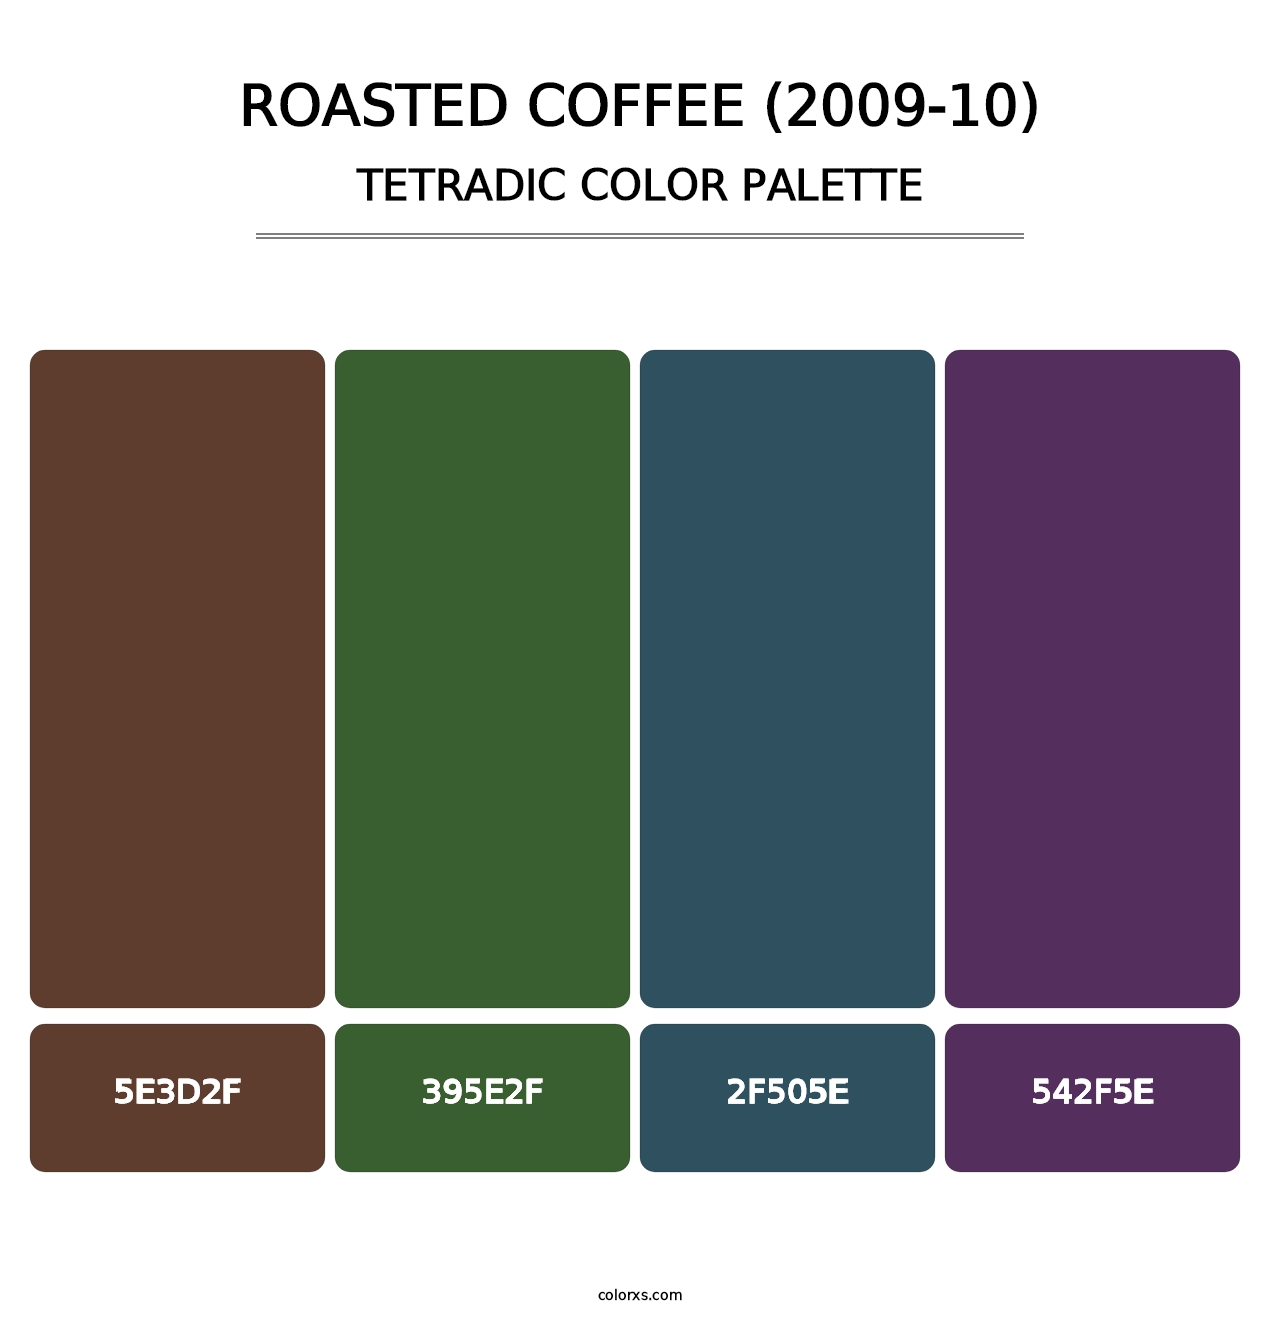 Roasted Coffee (2009-10) - Tetradic Color Palette